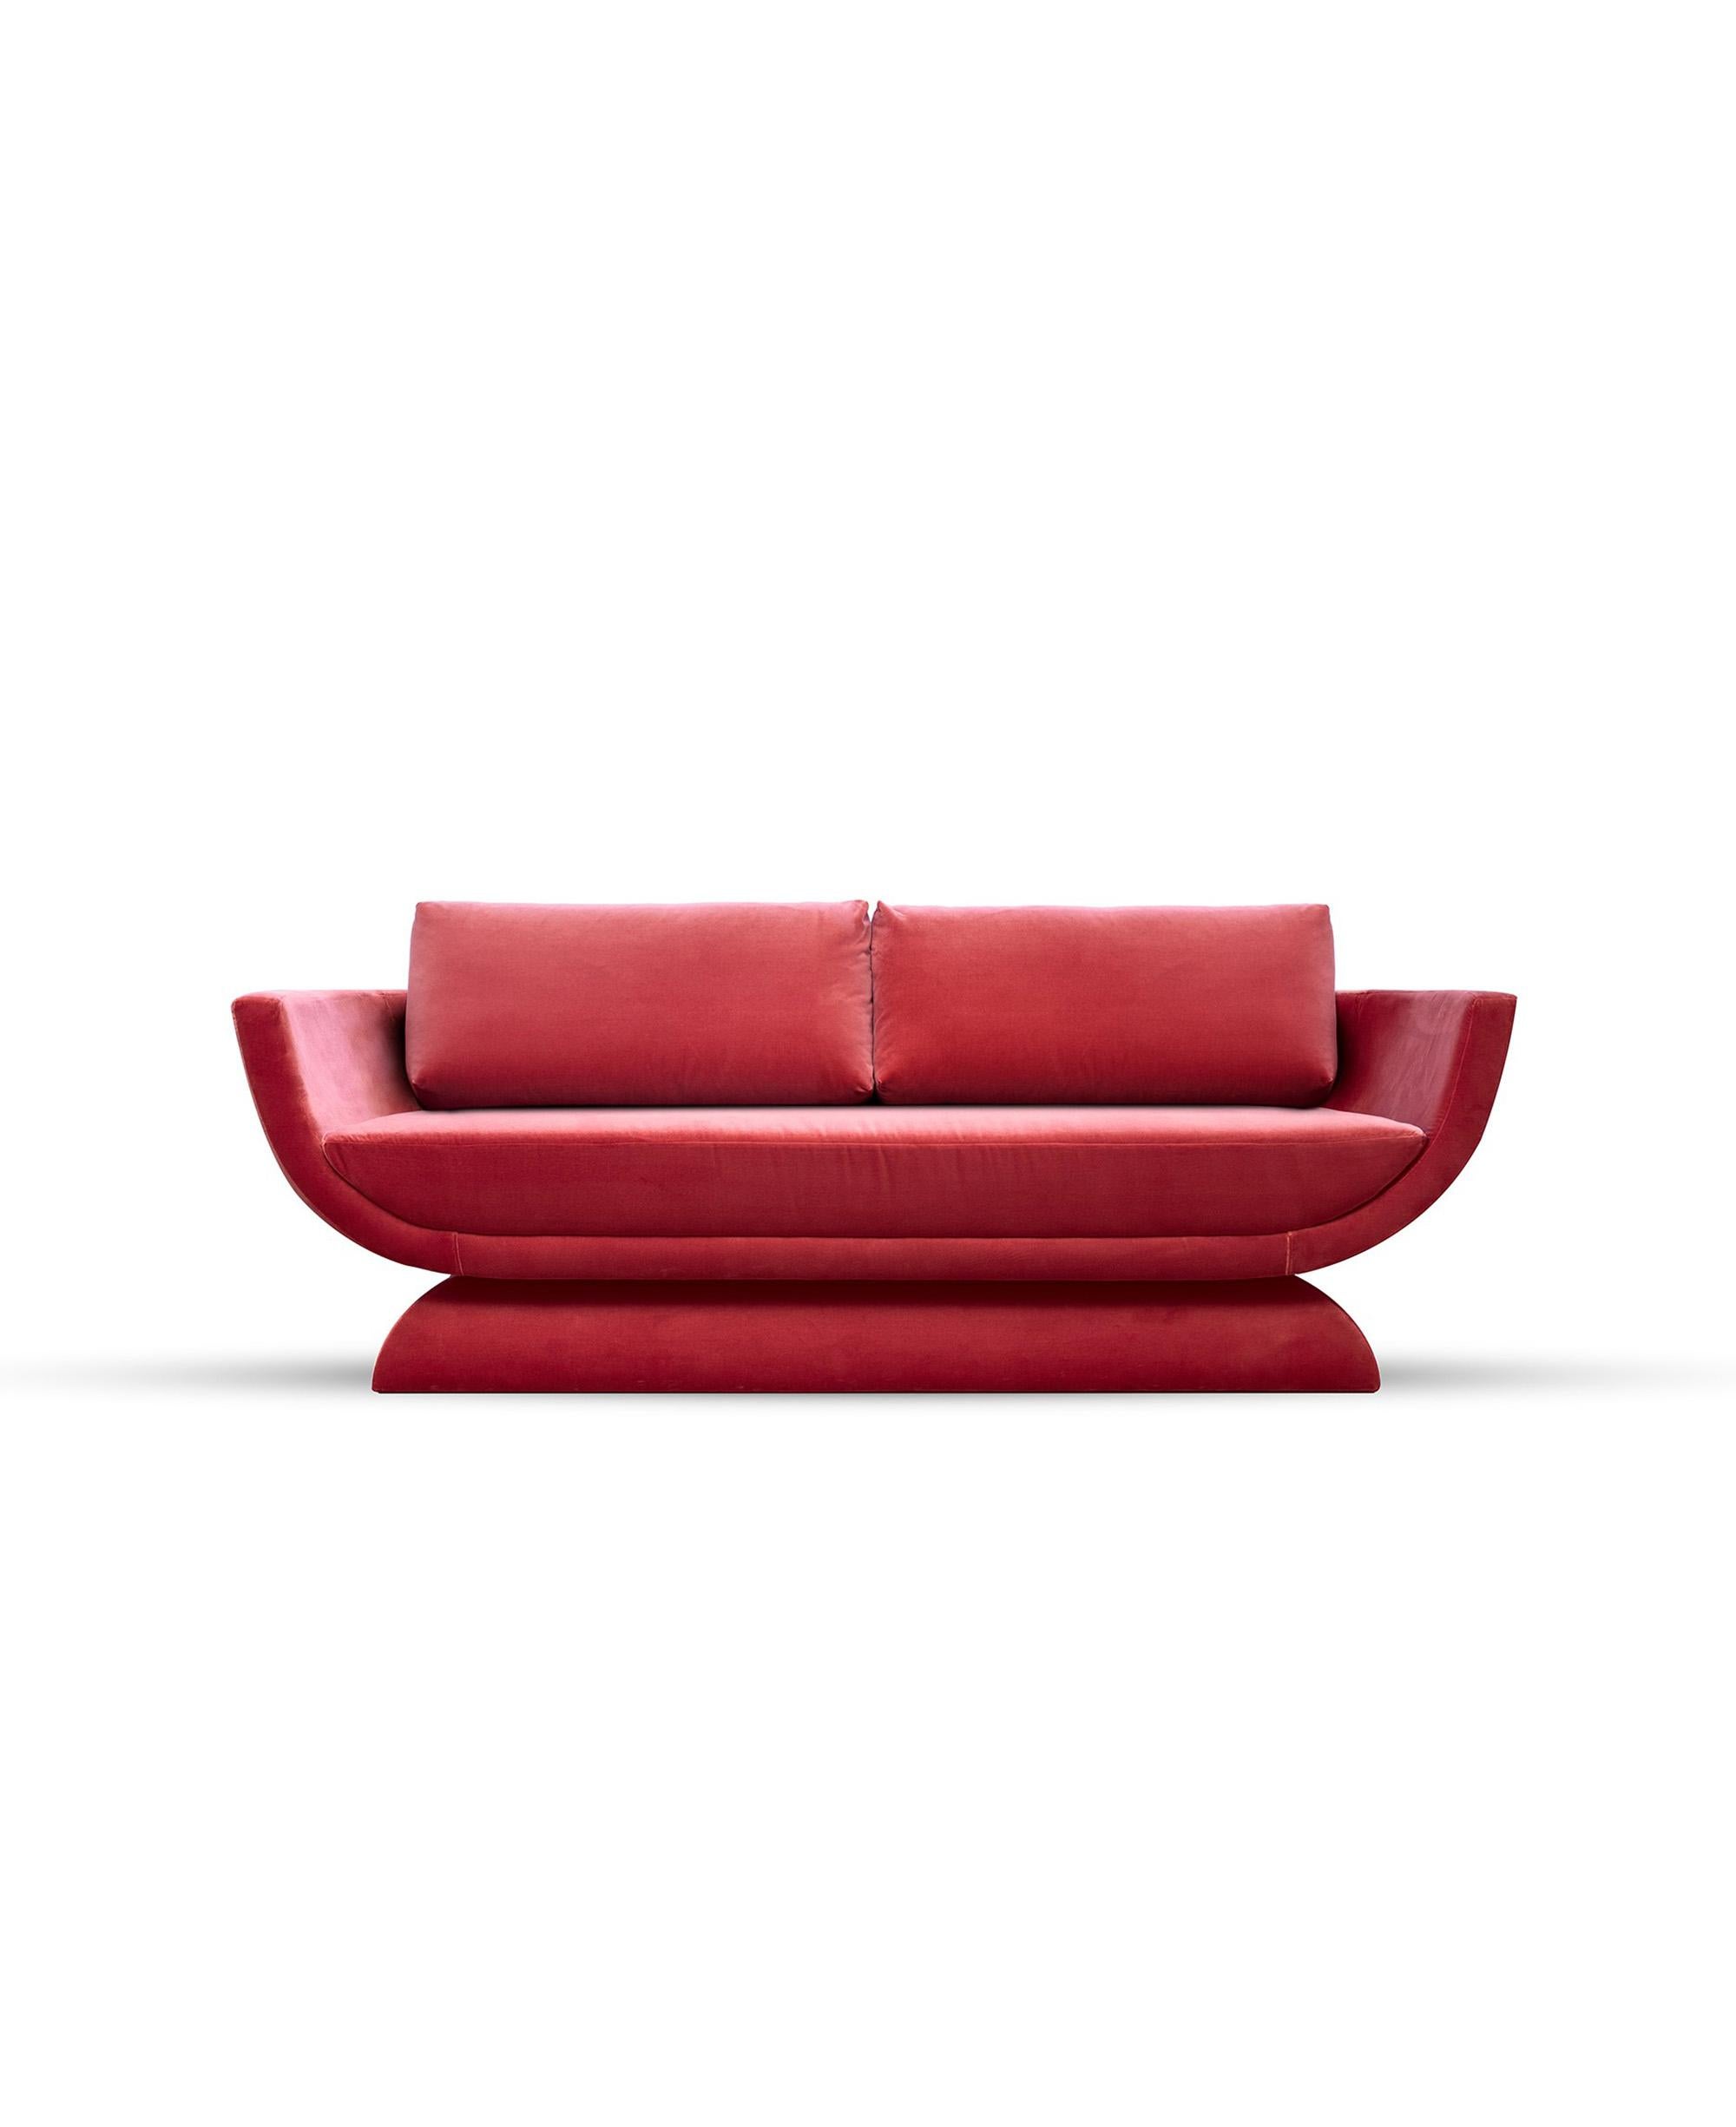 Oscar Sofa by DUISTT 
Dimensions: W 210 x D 85 x H 76 cm
Materials: Duistt Fabric

Oscar sofa, crafted with great attention to detail, is part of Oscar collection inspired by the curved lines poetry of Oscar Niemeyer’s architecture. OSCAR sofa